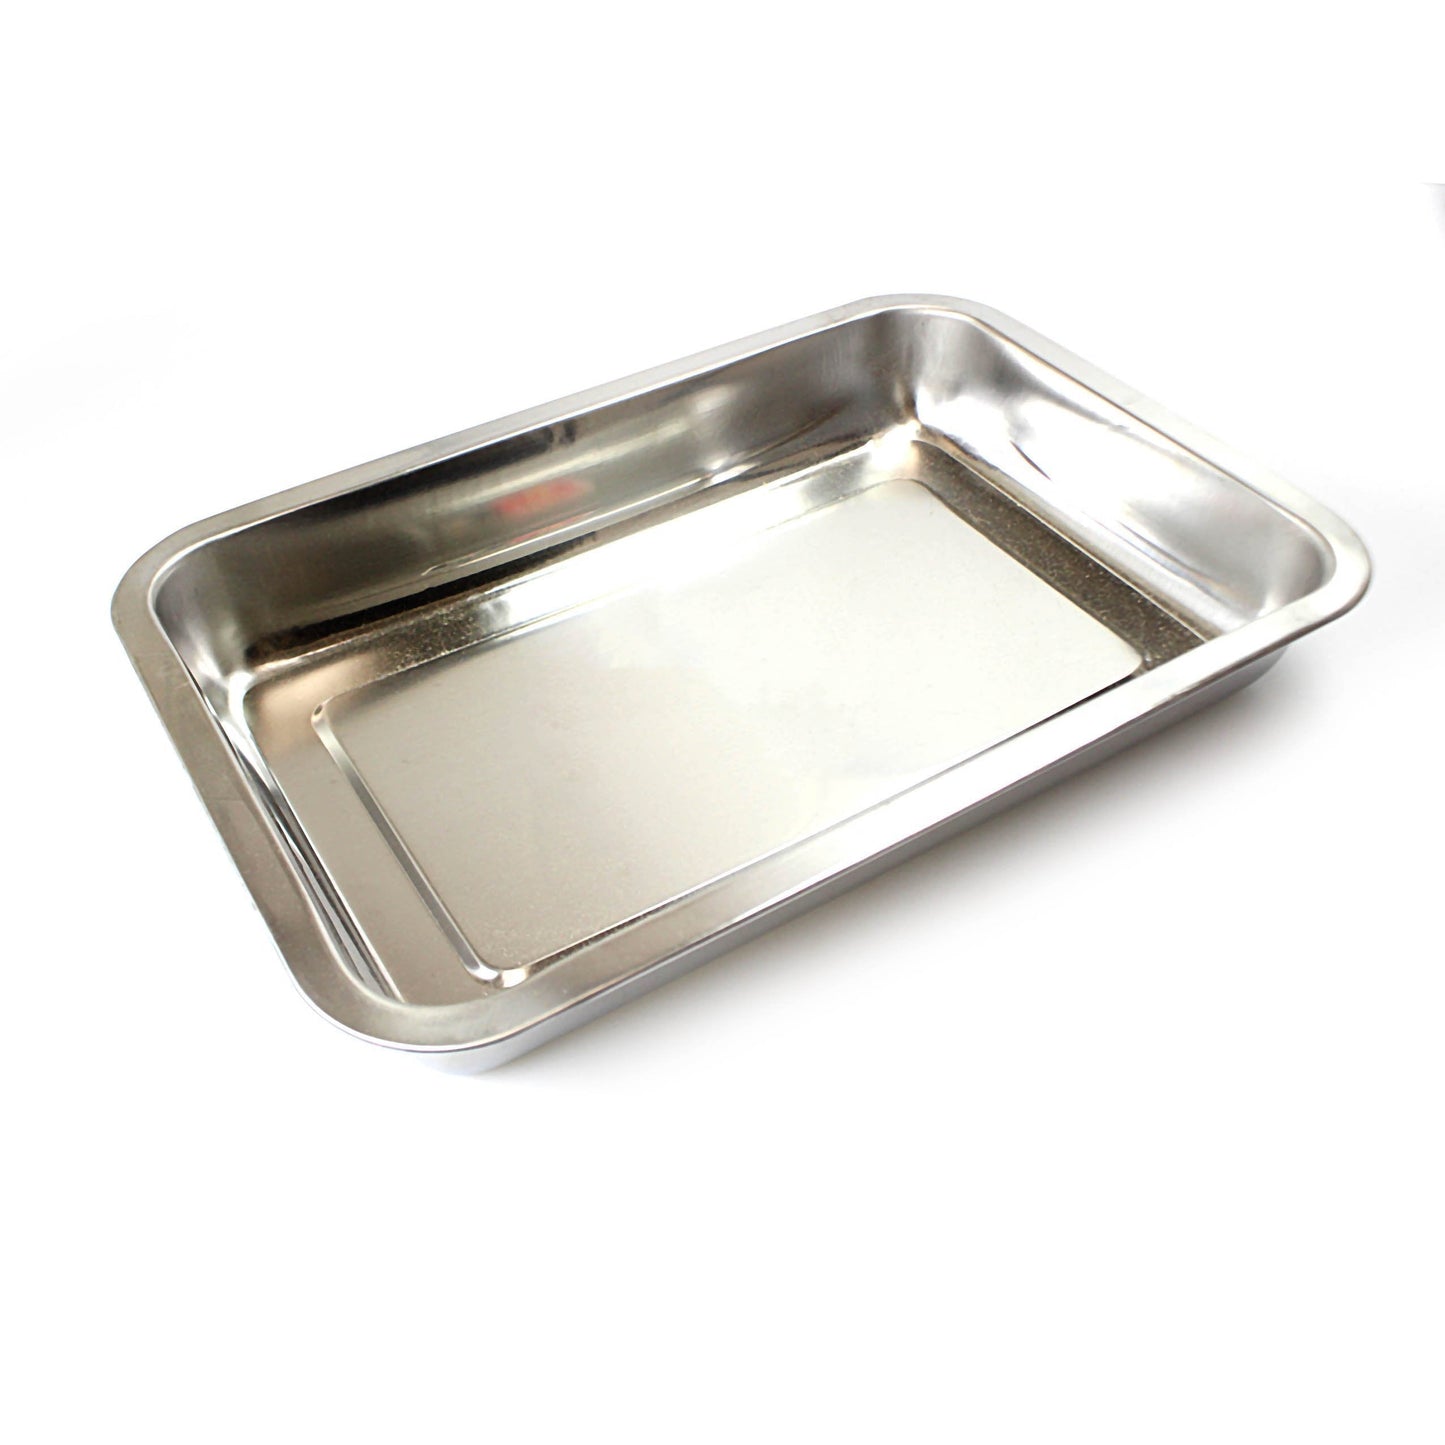 Home Baking Steel Roasting Pan Dish Cooking Lasagne Cake Rectangle Dish 40cm x 30cm 6120 A (Parcel Rate)p